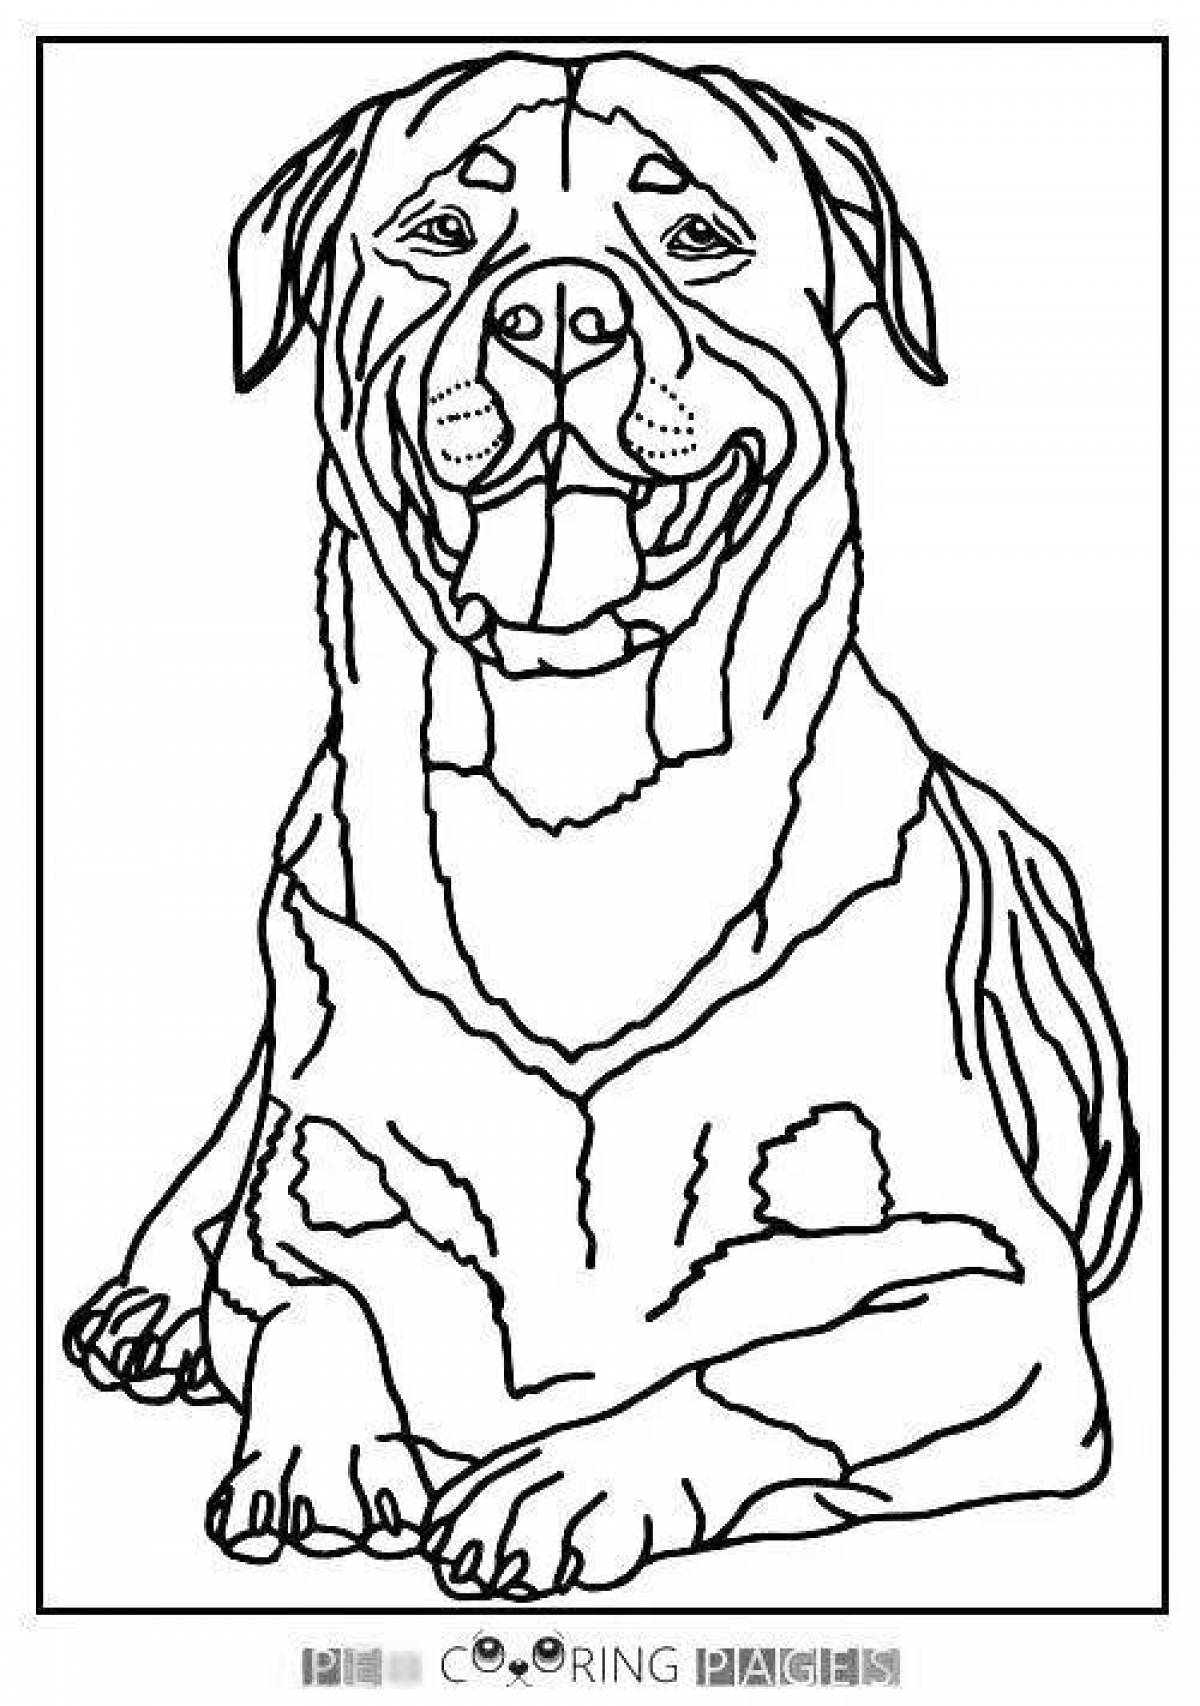 Coloring page disturbing rottweiler